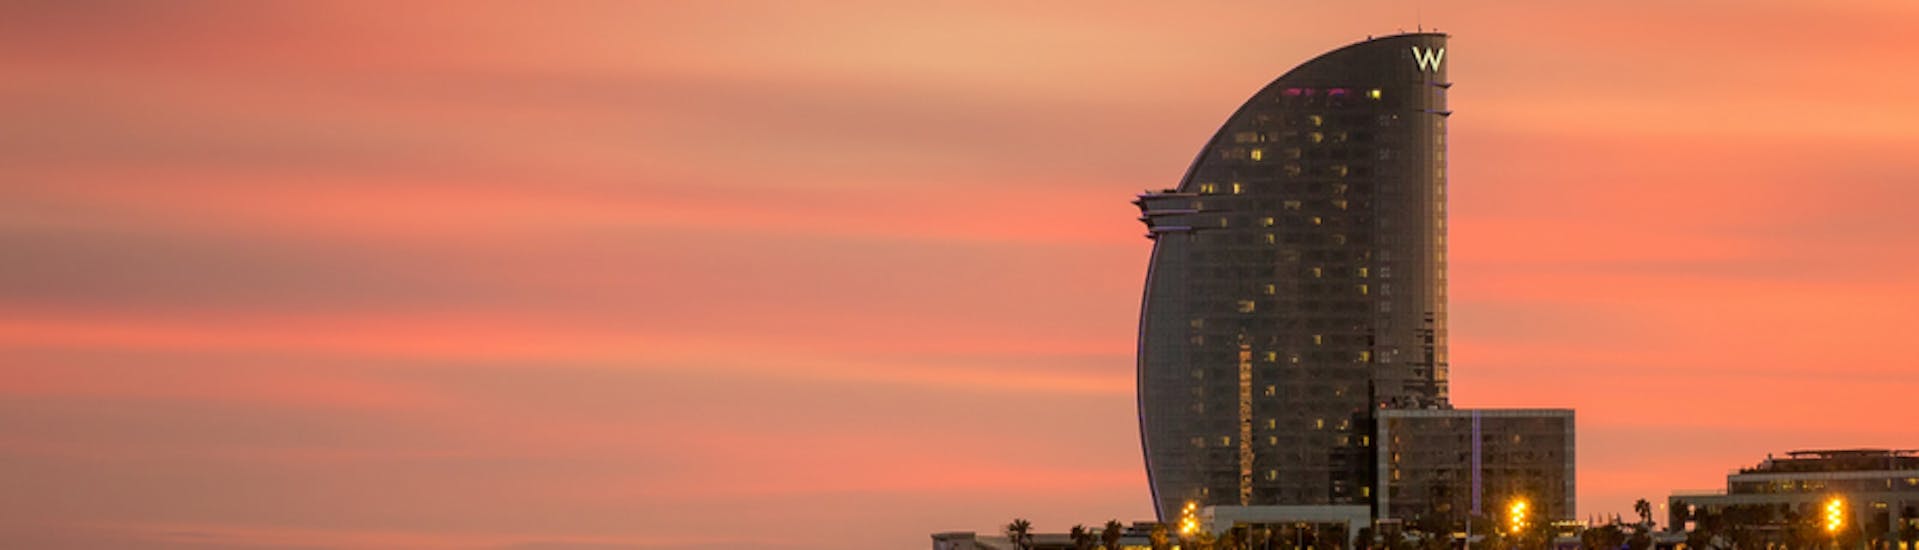 Sunset in Barcelona with Gin & Tonic workshop with BDA Experiences Barcelona.